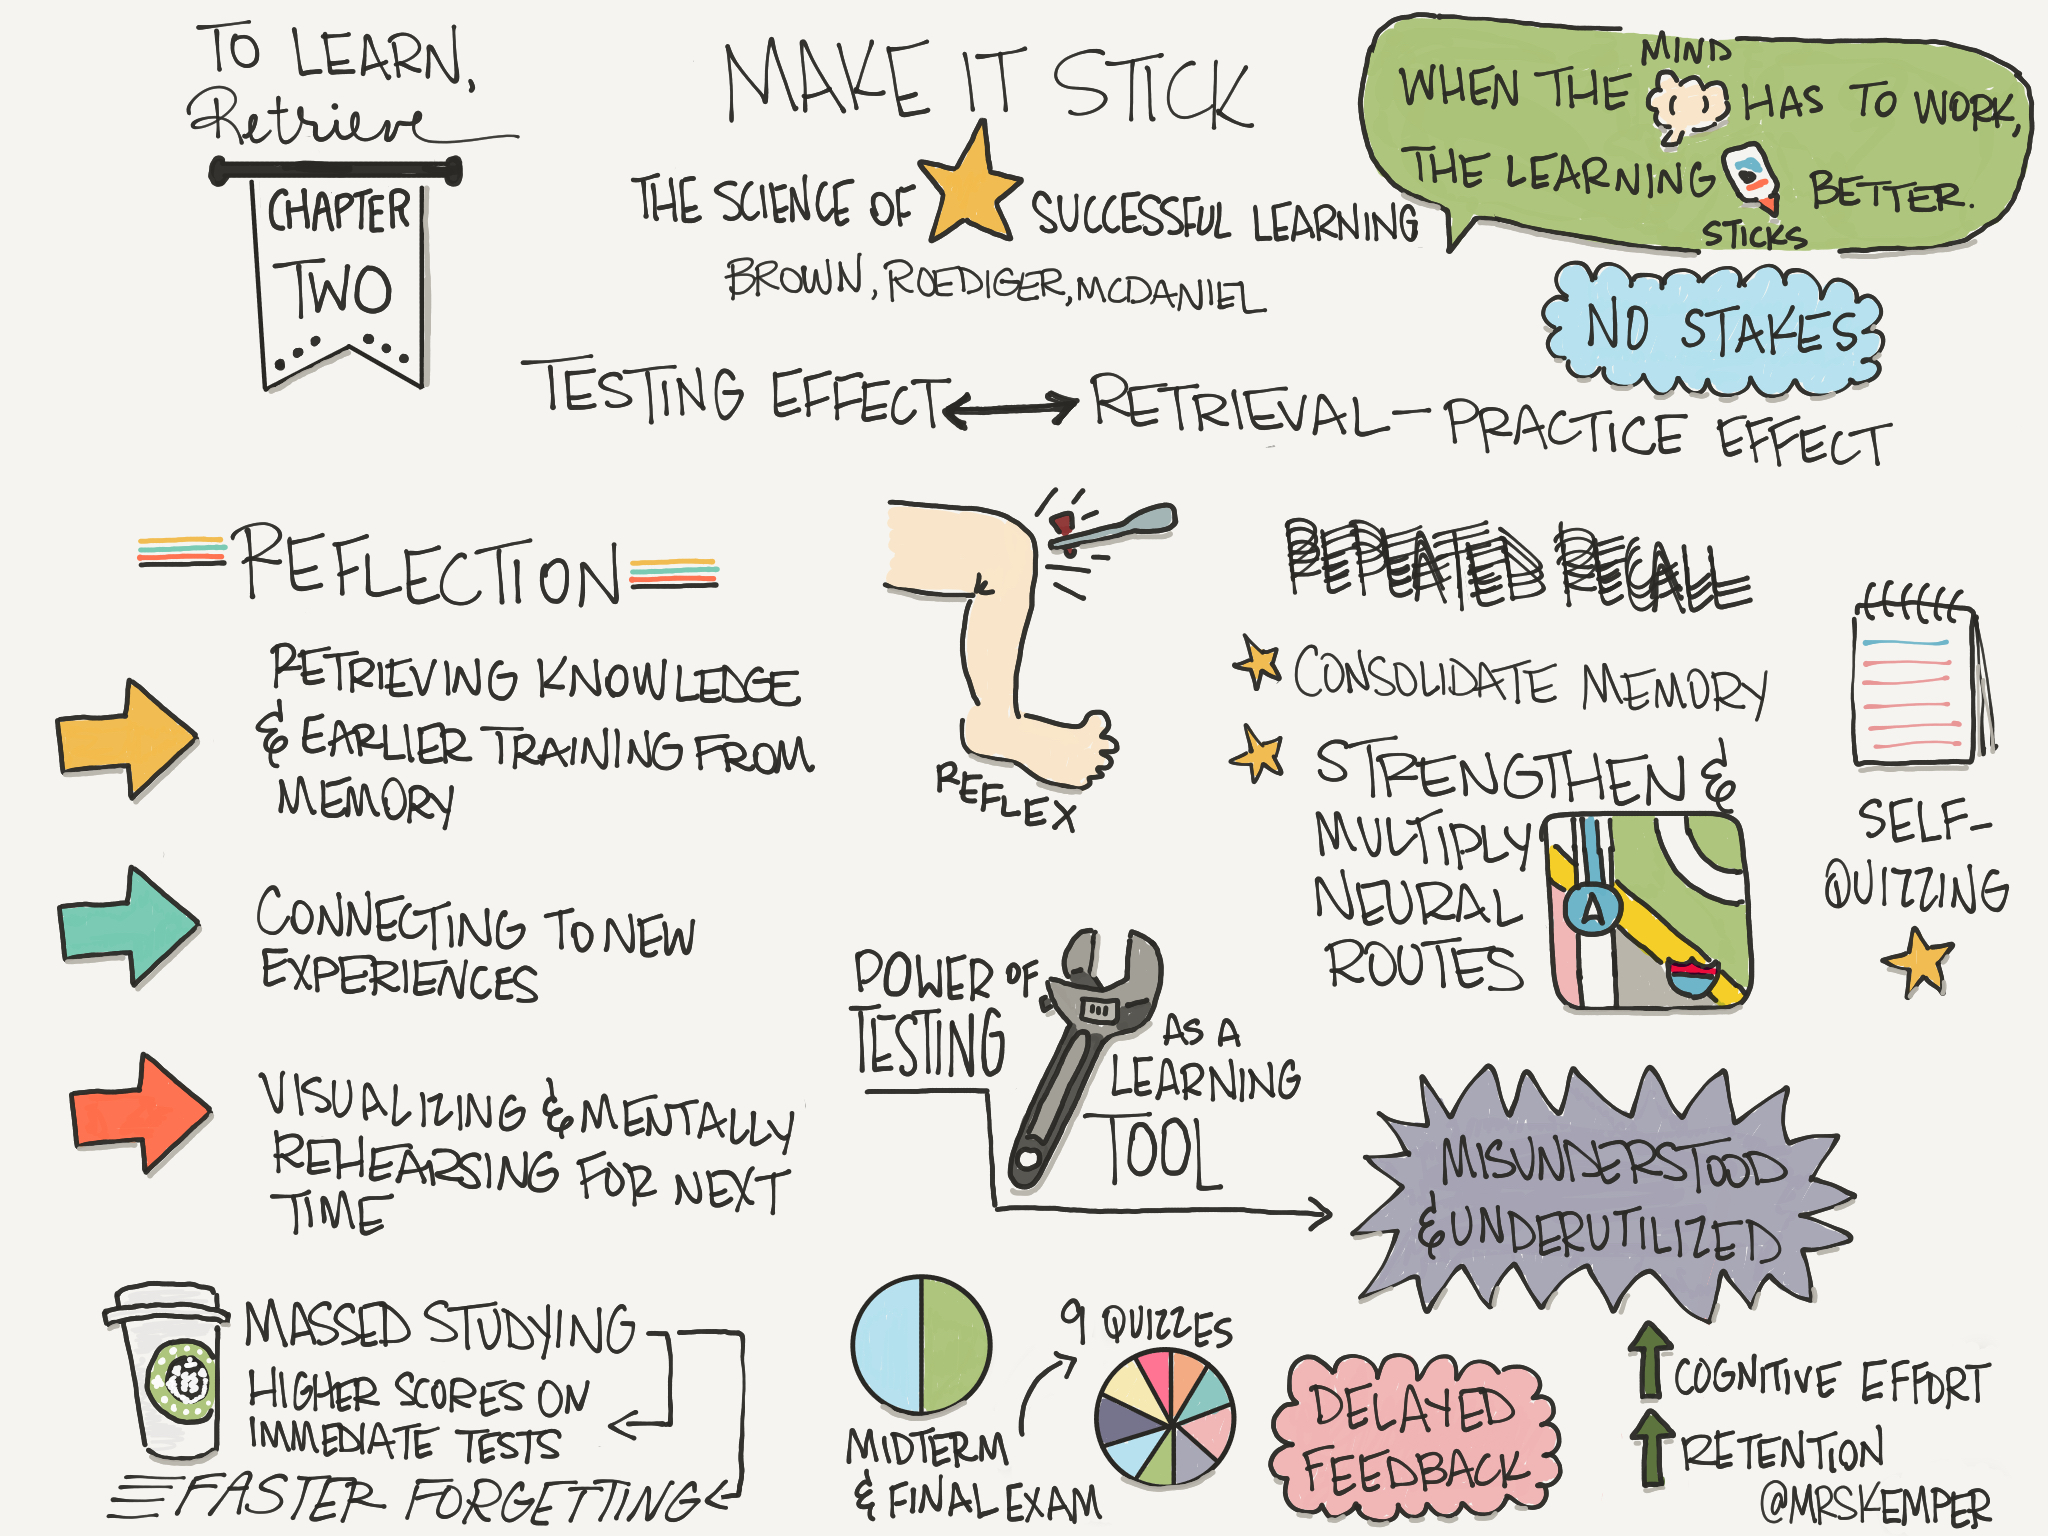 Make it Stick: The Science of Successful Learning – Retrieval Practice